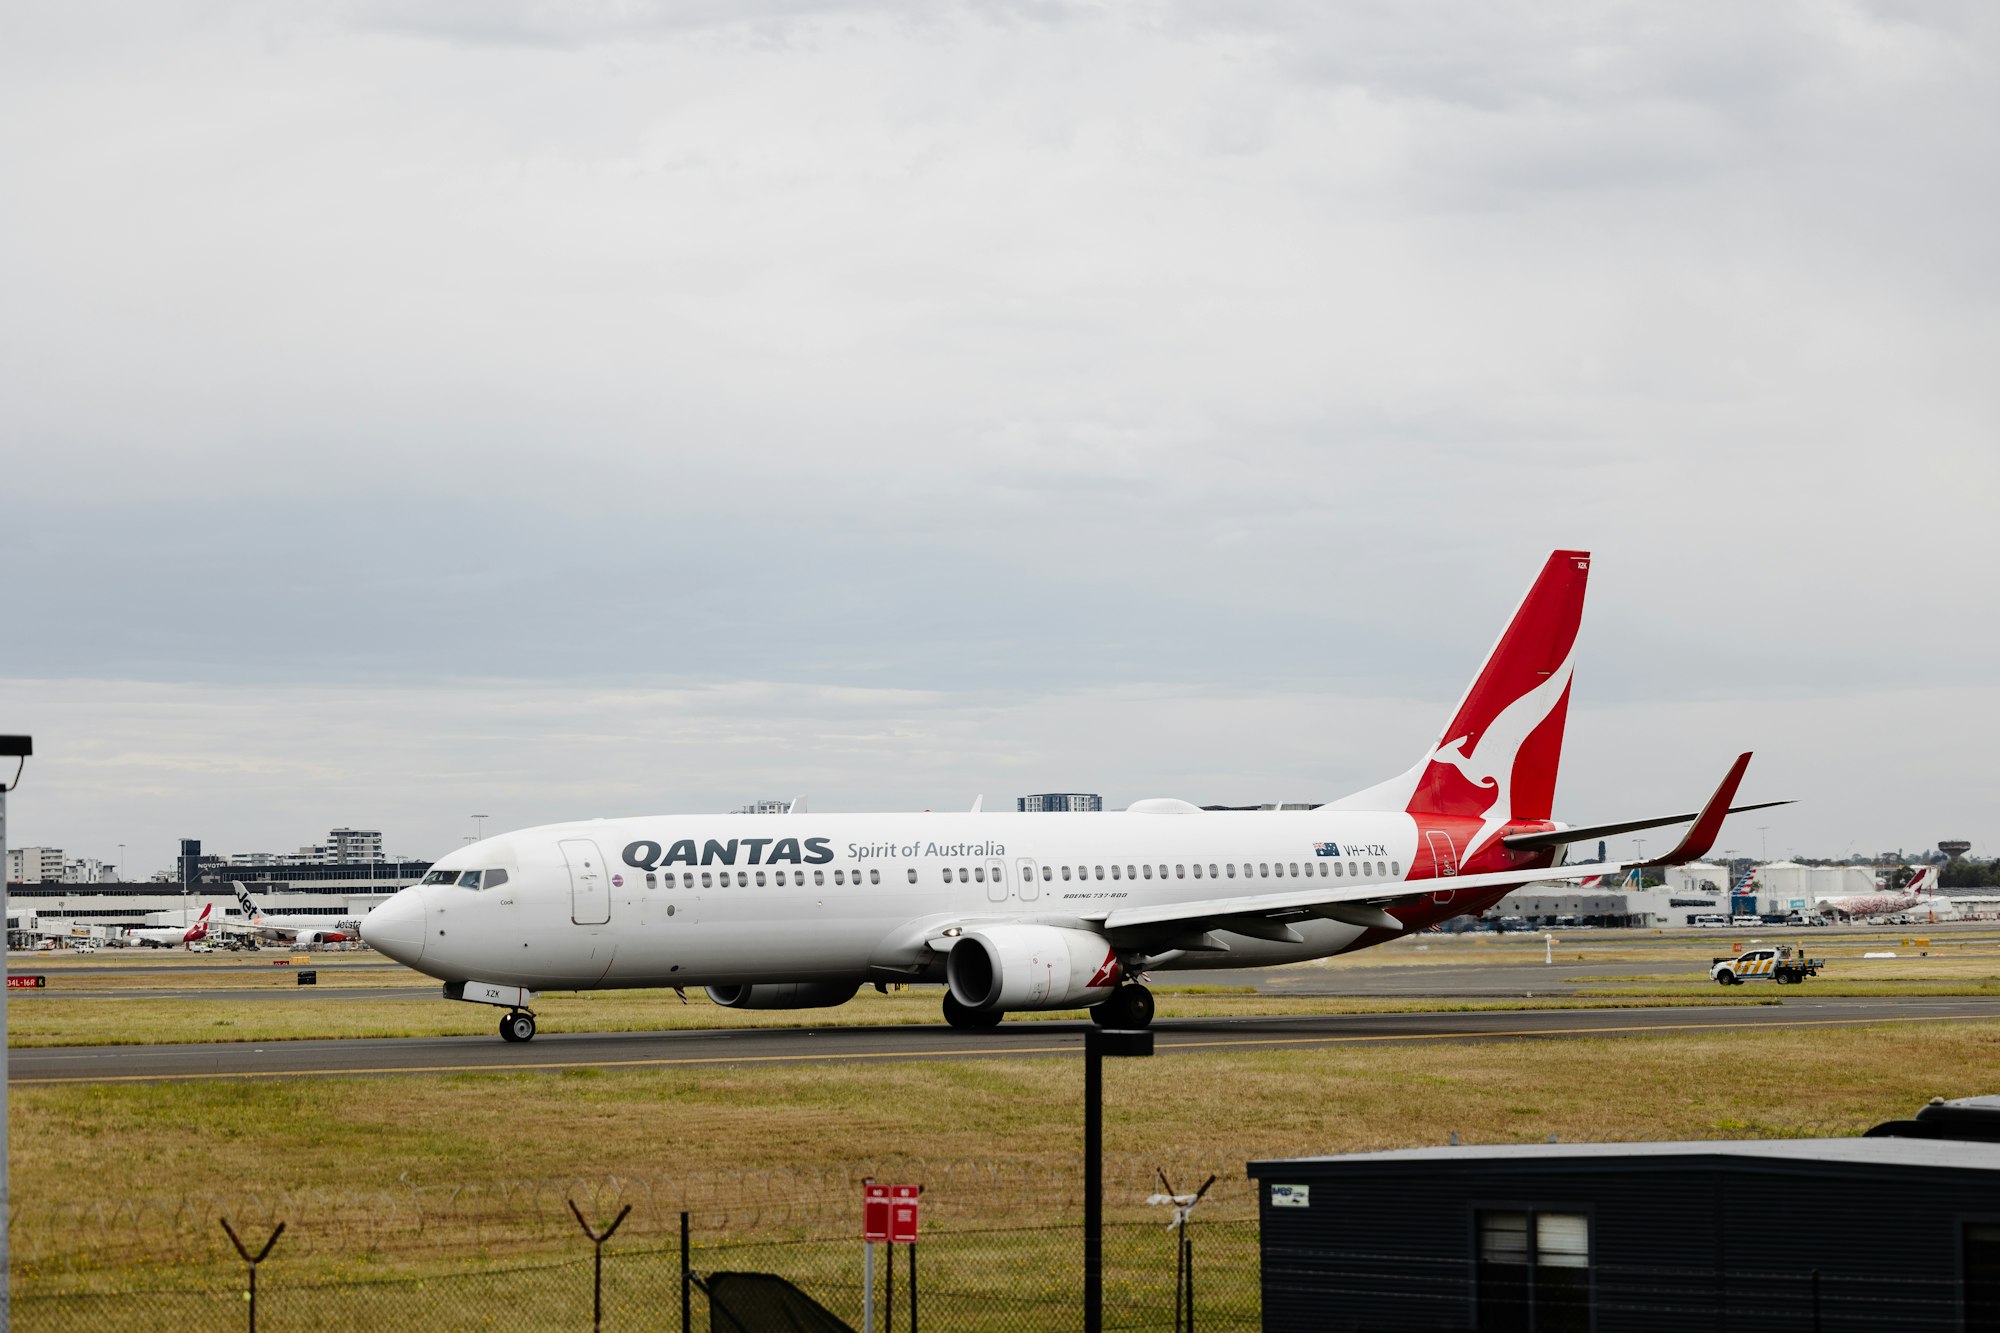 Qantas Group Announces Key Executive Changes: Loyalty CEO Steps Down, New Chief People Officer Appointed